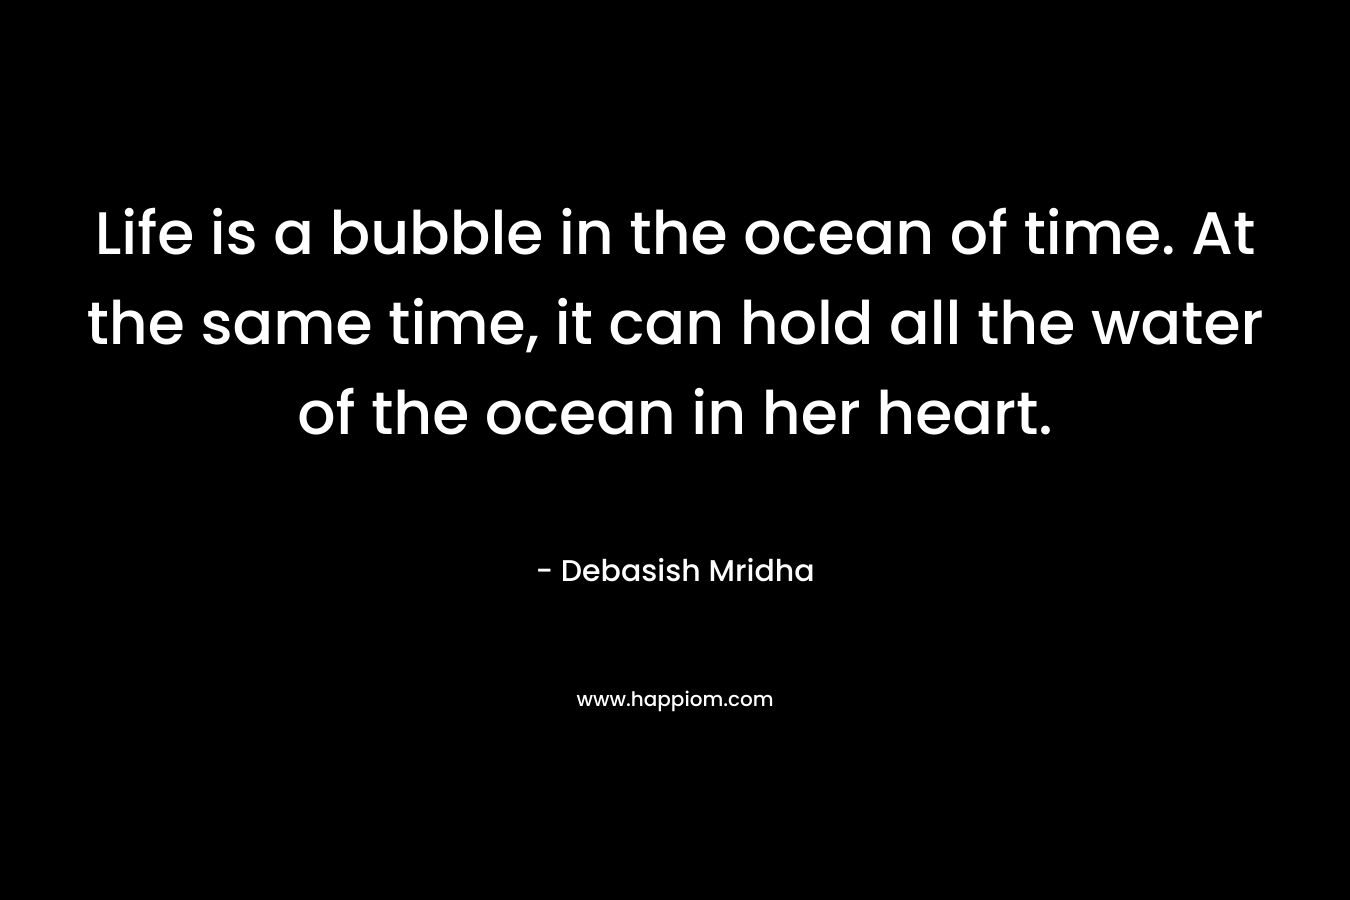 Life is a bubble in the ocean of time. At the same time, it can hold all the water of the ocean in her heart.